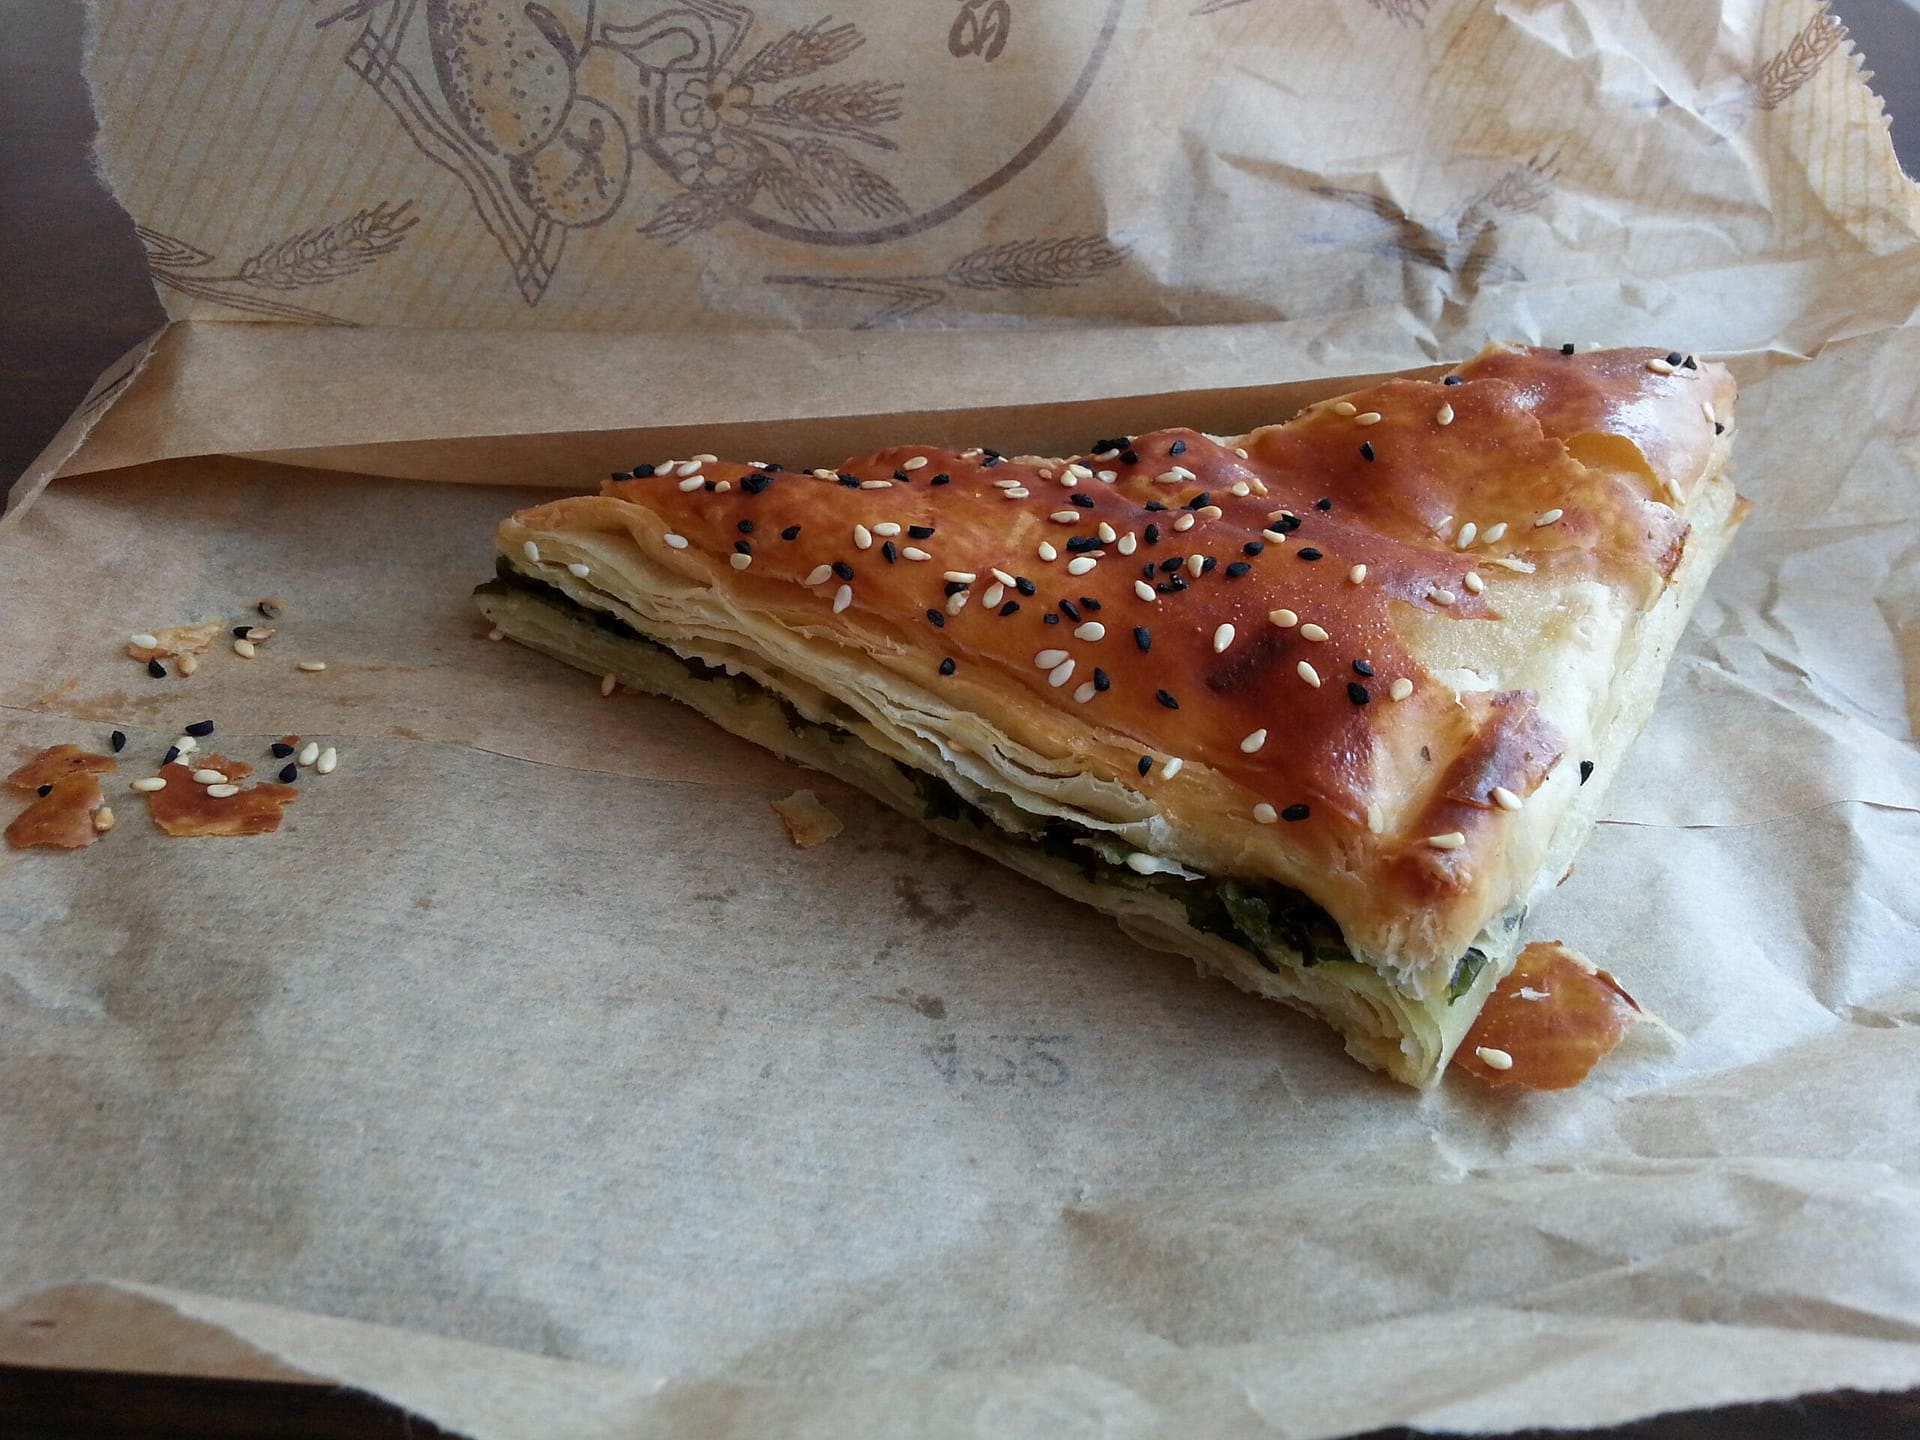 Triangles of dark brown, crispy pastry, with black & yellow sesame seeds scattered on the top, resting on a paper bag.